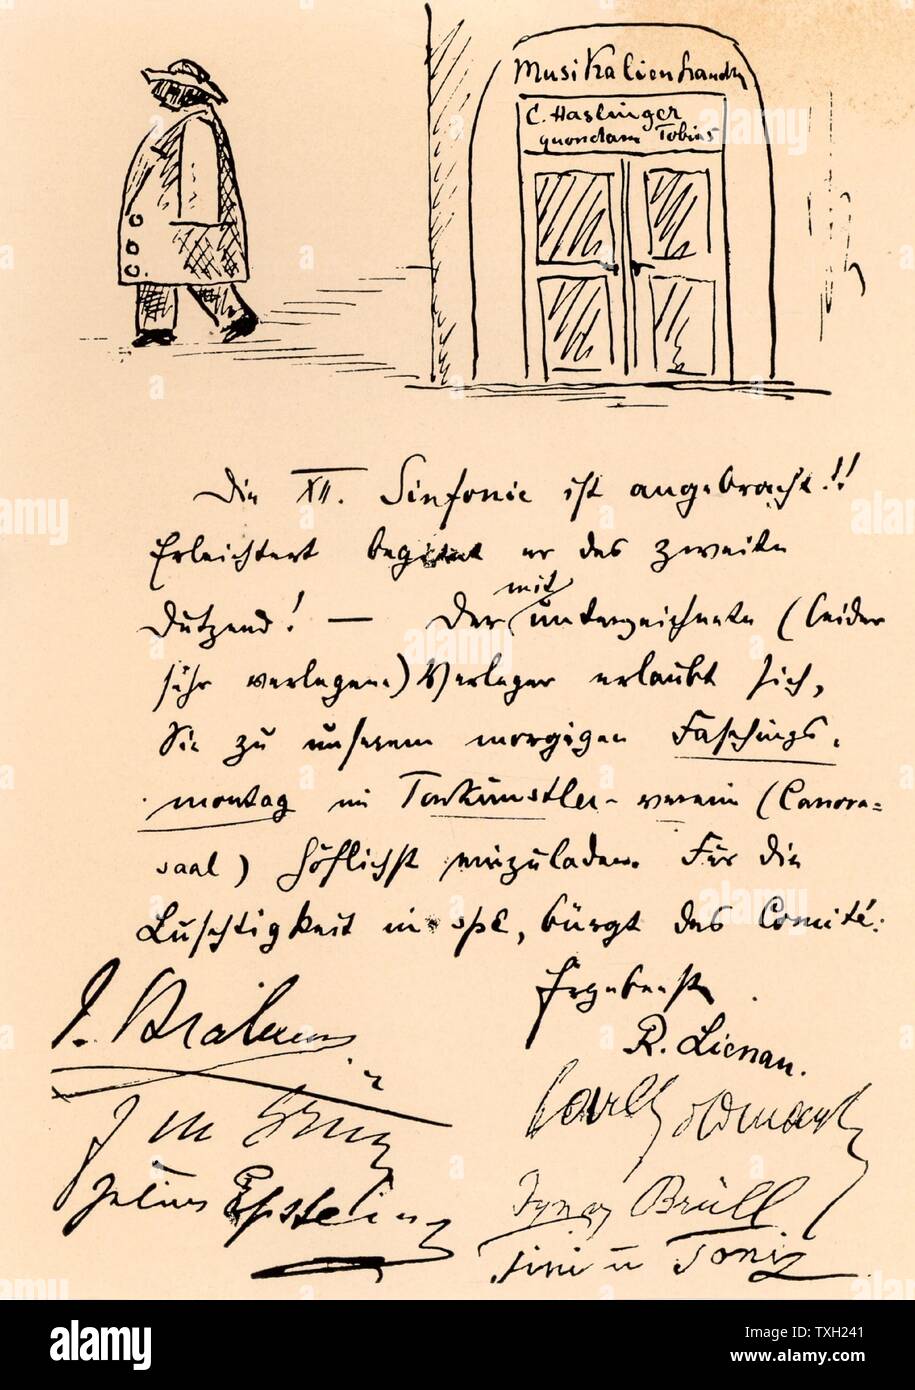 Invitation to a carnival at the Tonkunstlerverein, Vienna. Cartoon shows Anton Bruckner (1824-1896) leaving the office of Haslinger, Beethoven's publisher: 'The twelfth symphony has been worked off!! Relieved, he starts the second dozen'.   Signed by Johnnes Brahms, J.M. Grun, Julius Epstein, R. Lienau, Carl Goldmark, Brull, and Mr & Mrs Anton Door. Stock Photo